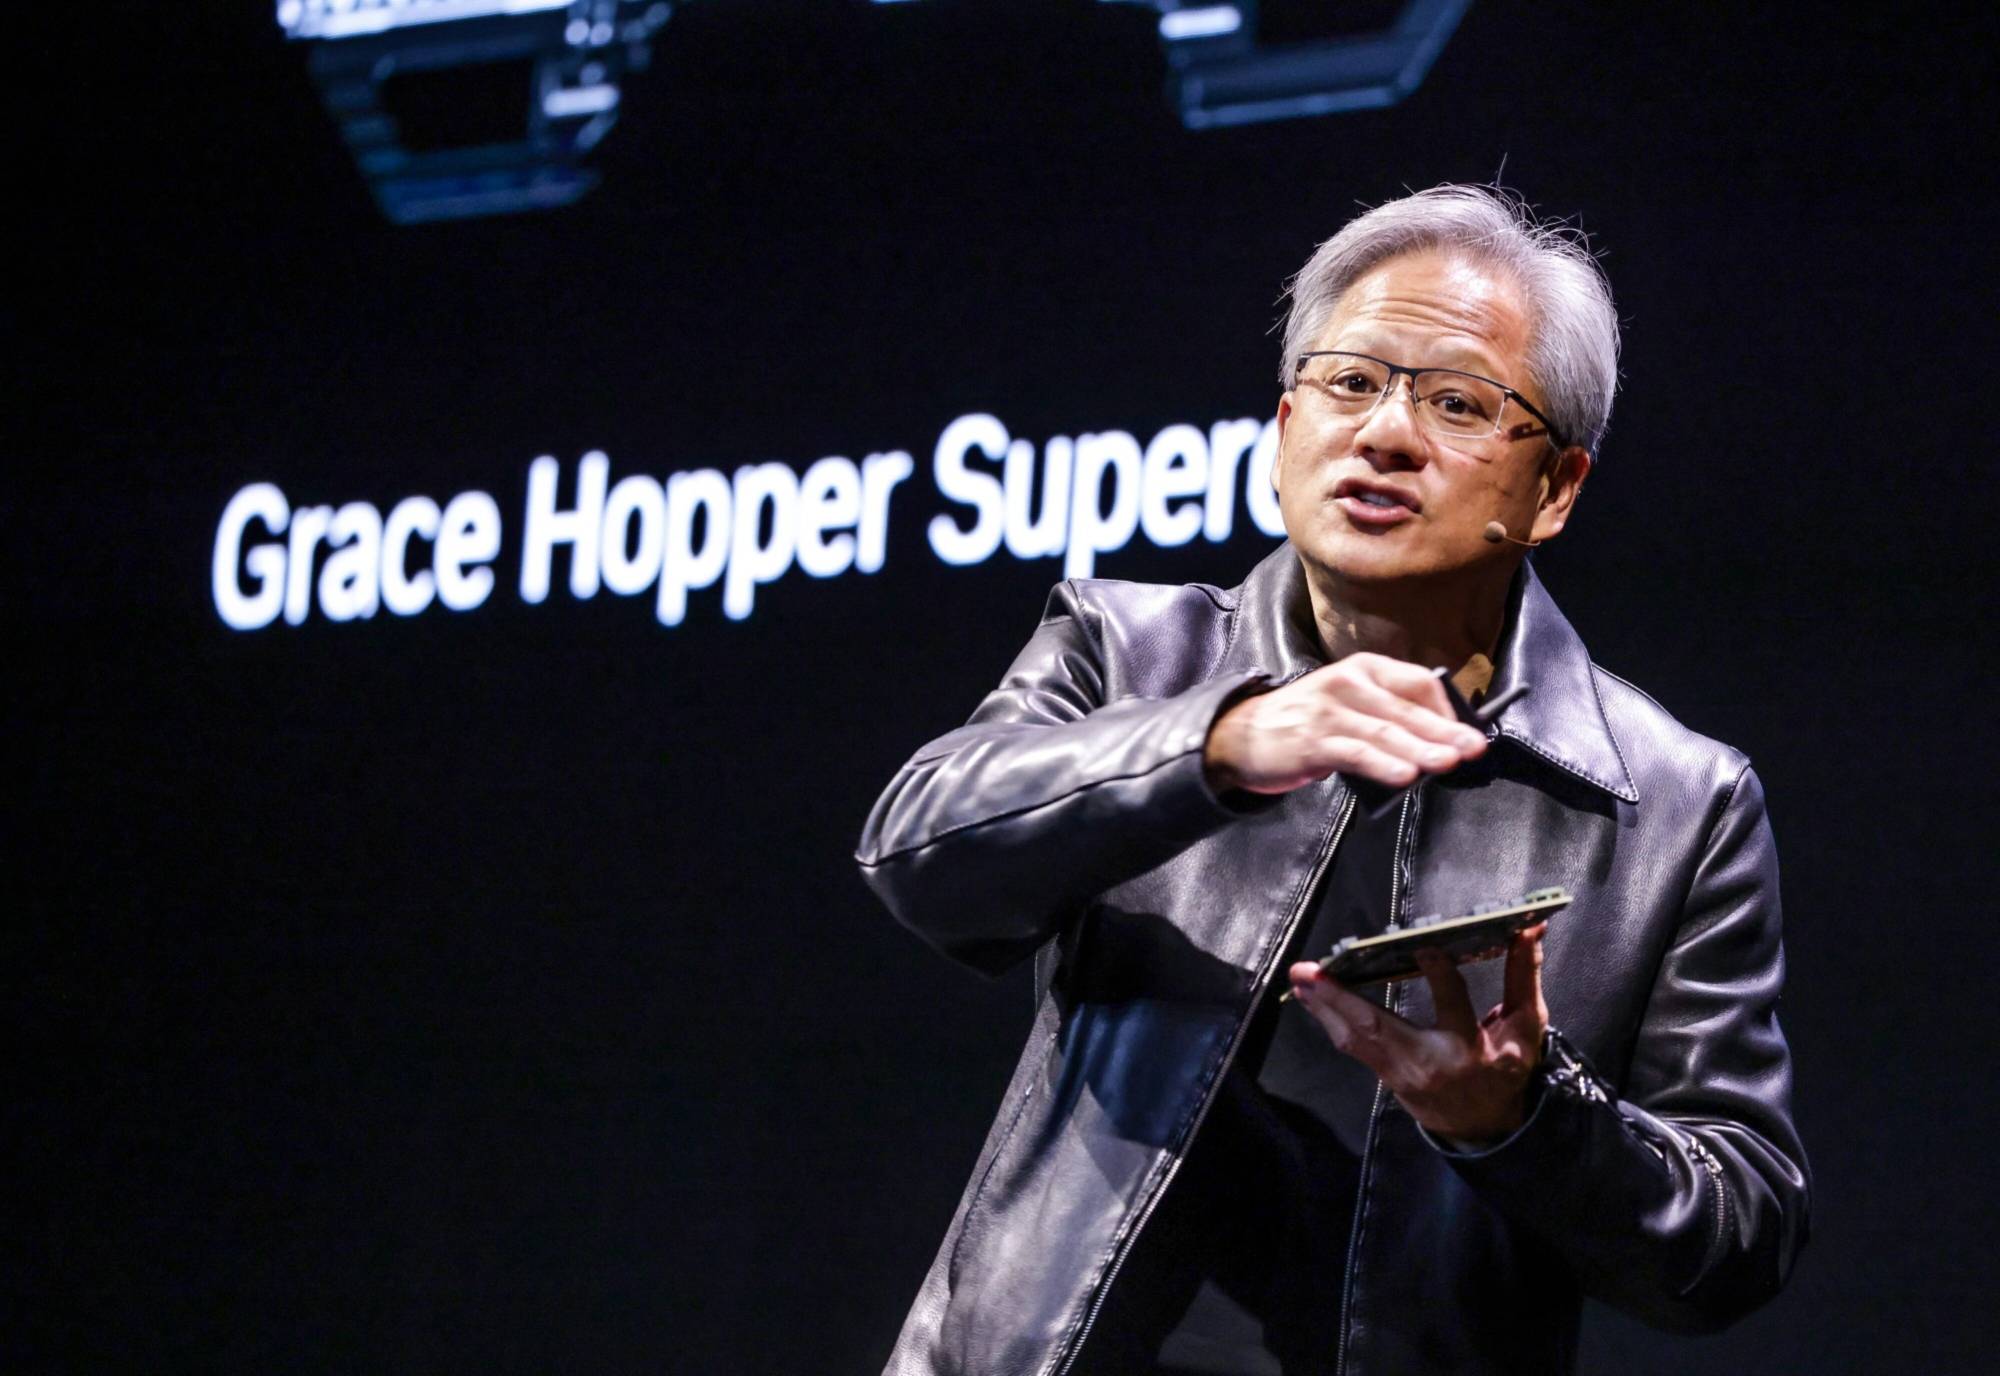 Jensen Huang, co-founder and chief executive officer of Nvidia Corp., speaks during the Taipei Computex expo on Monday. During his two-hour presentation, Huang unveiled a new batch of products and services tied to artificial intelligence, looking to capitalize on a frenzy that has made his company the world’s most valuable chipmaker. | BLOOMBERG